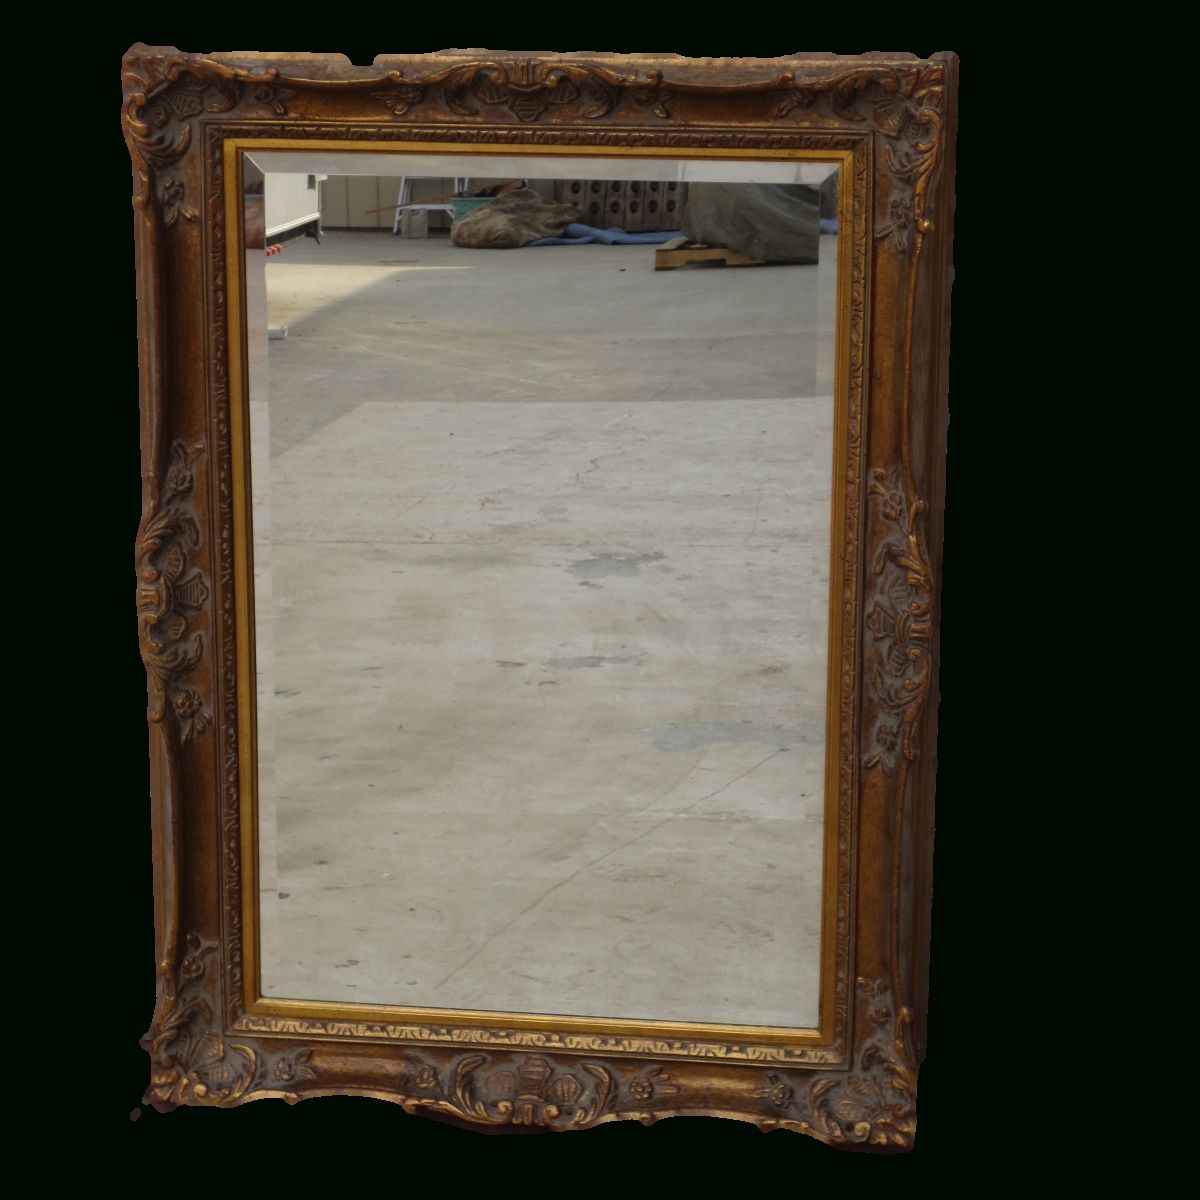 Antique Mirrors, Vintage Mirrors, Antique Wall Mirrors, And French Regarding Vintage Wall Mirrors (View 1 of 20)